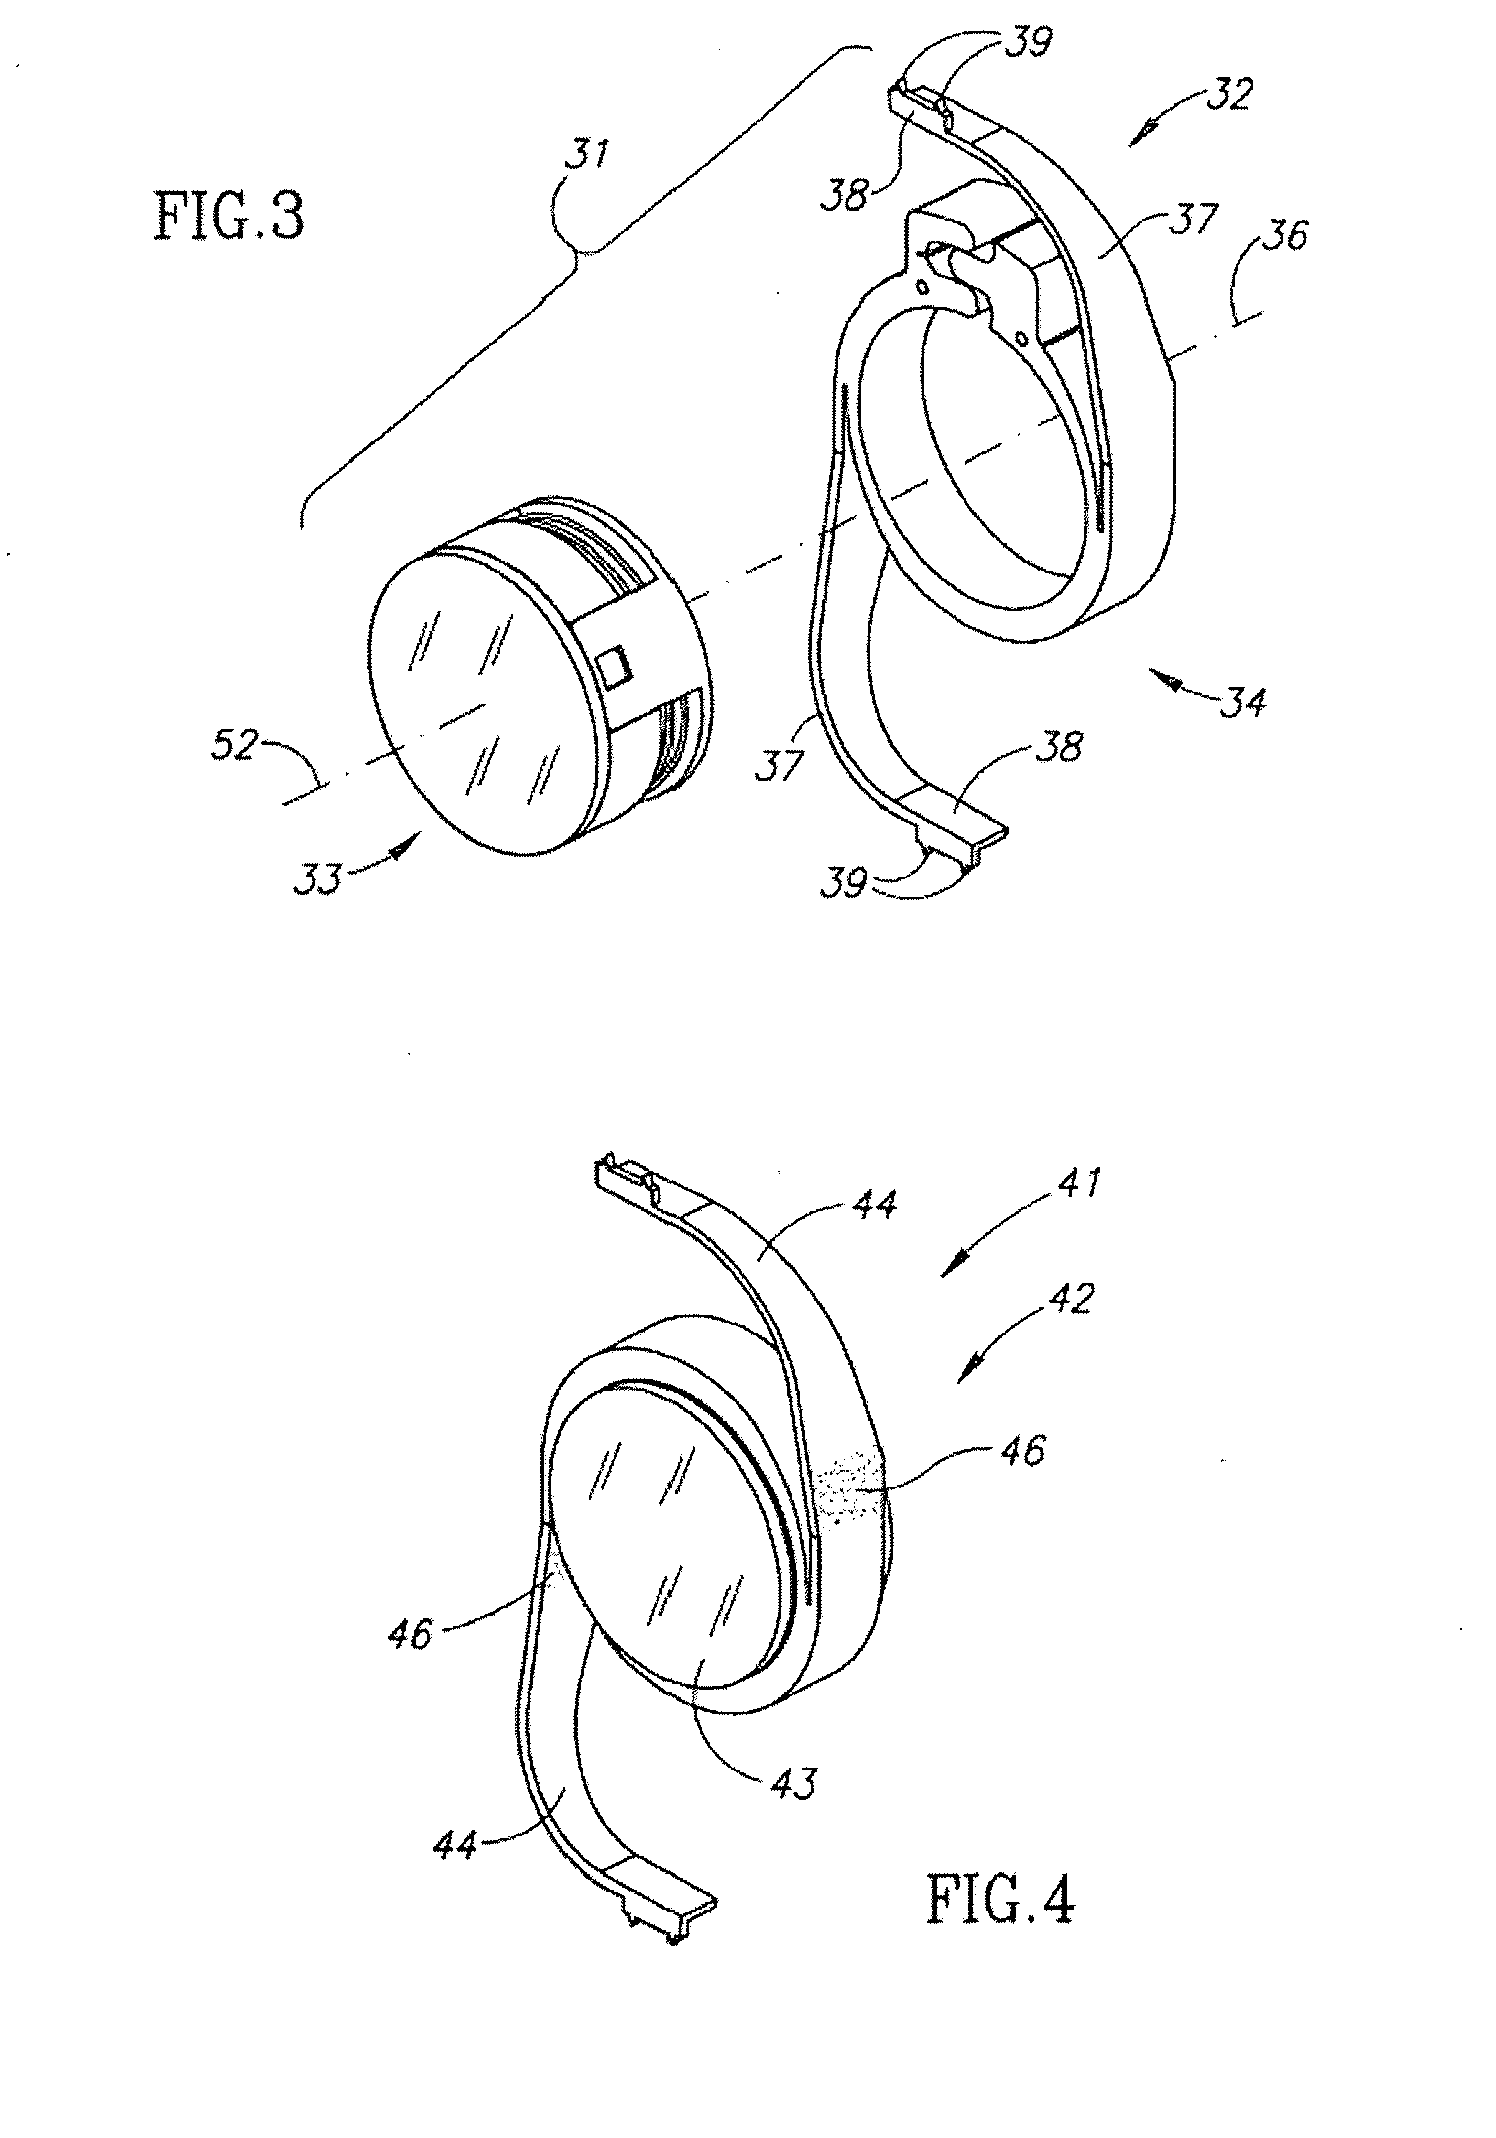 Accommodating Intraocular Lens (Aiol), and Aiol Assemblies Including Same